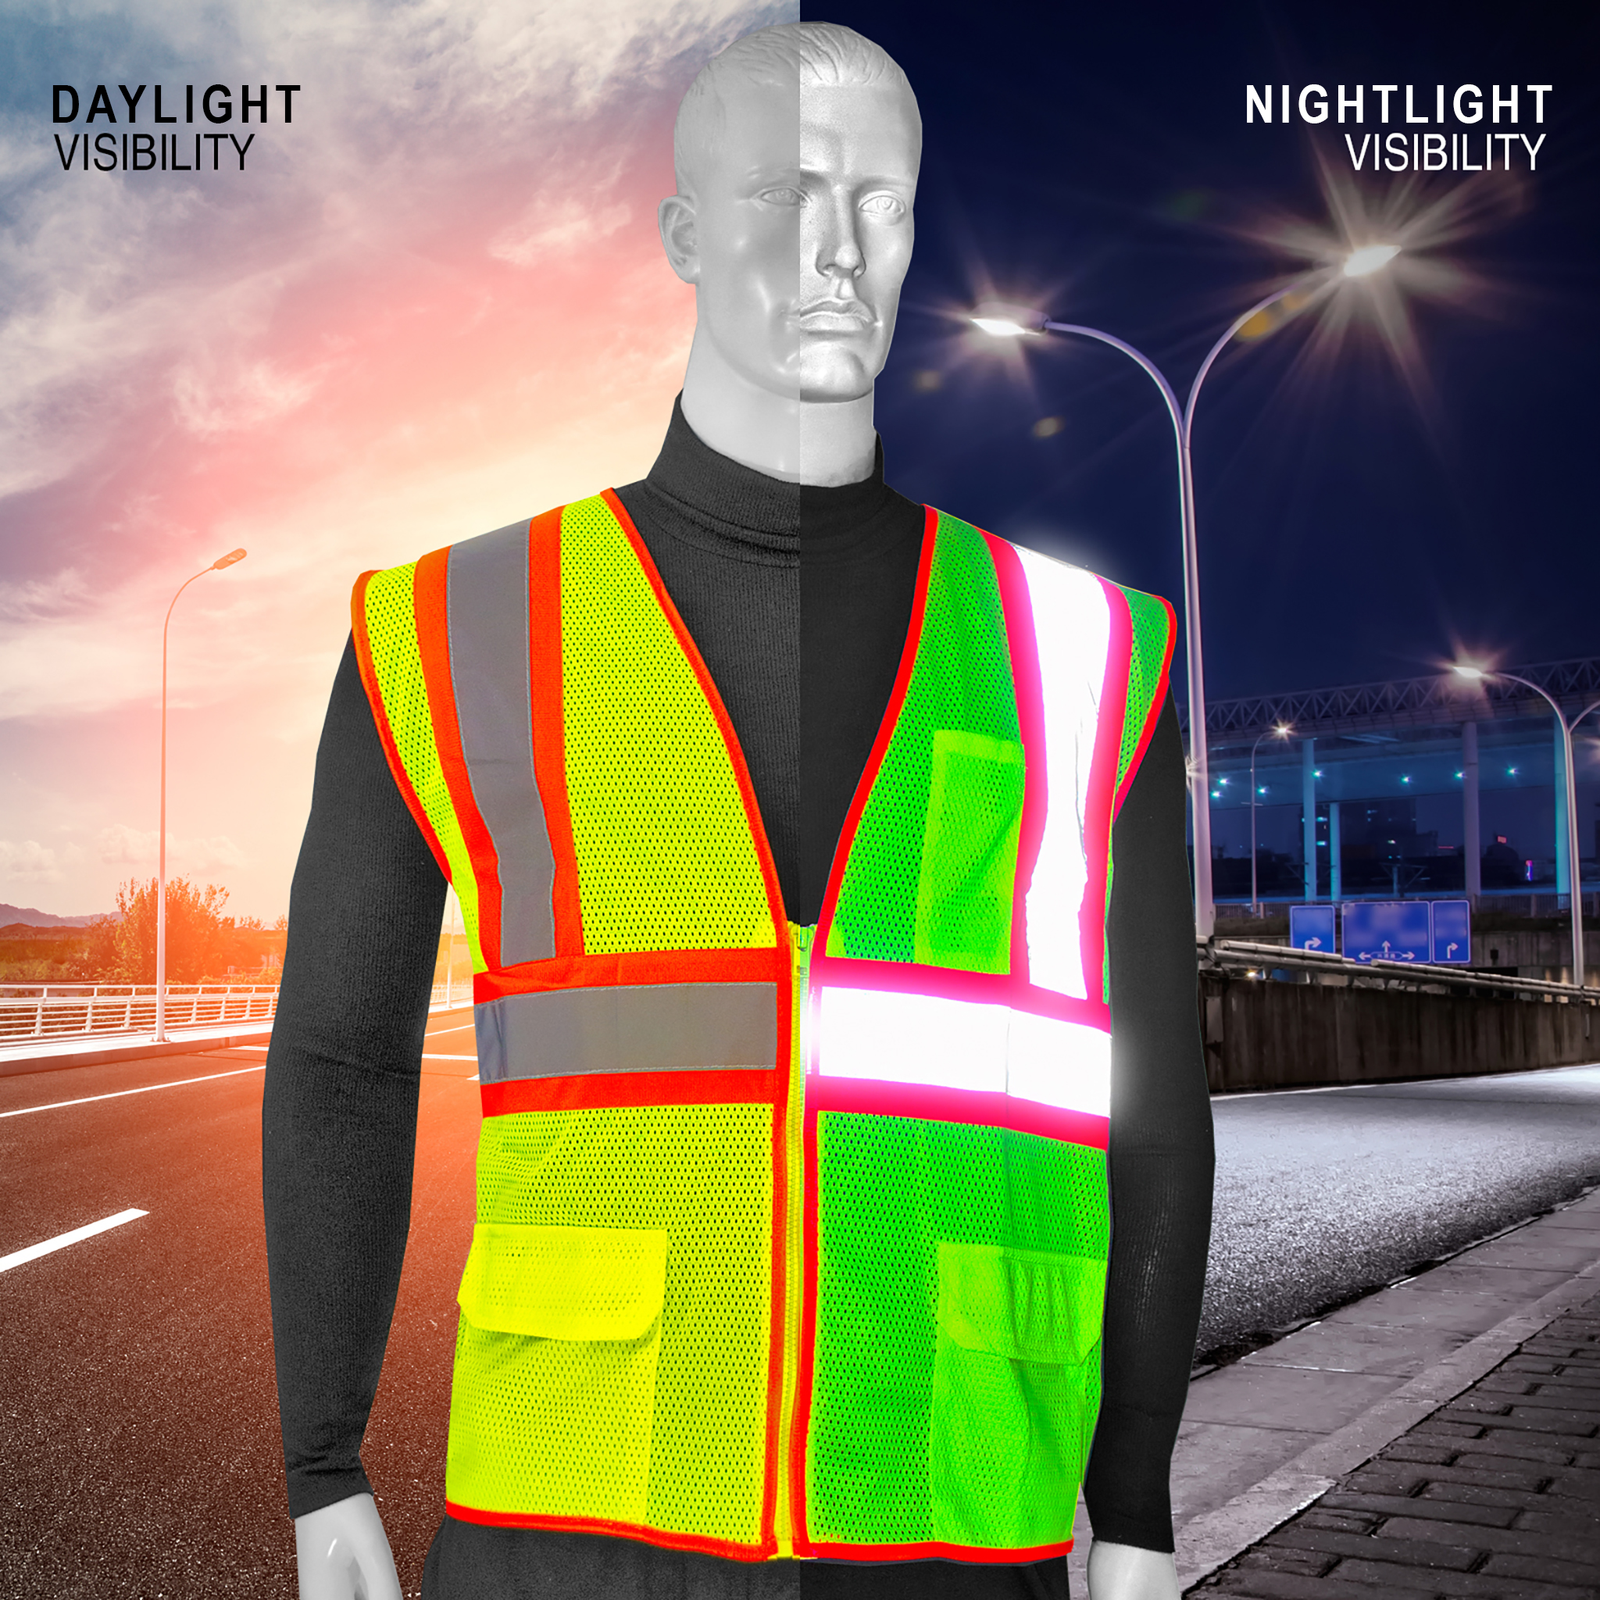 Mannequin wearing a lime Jorestech safety vest and it compares how bright it looks during day and night time